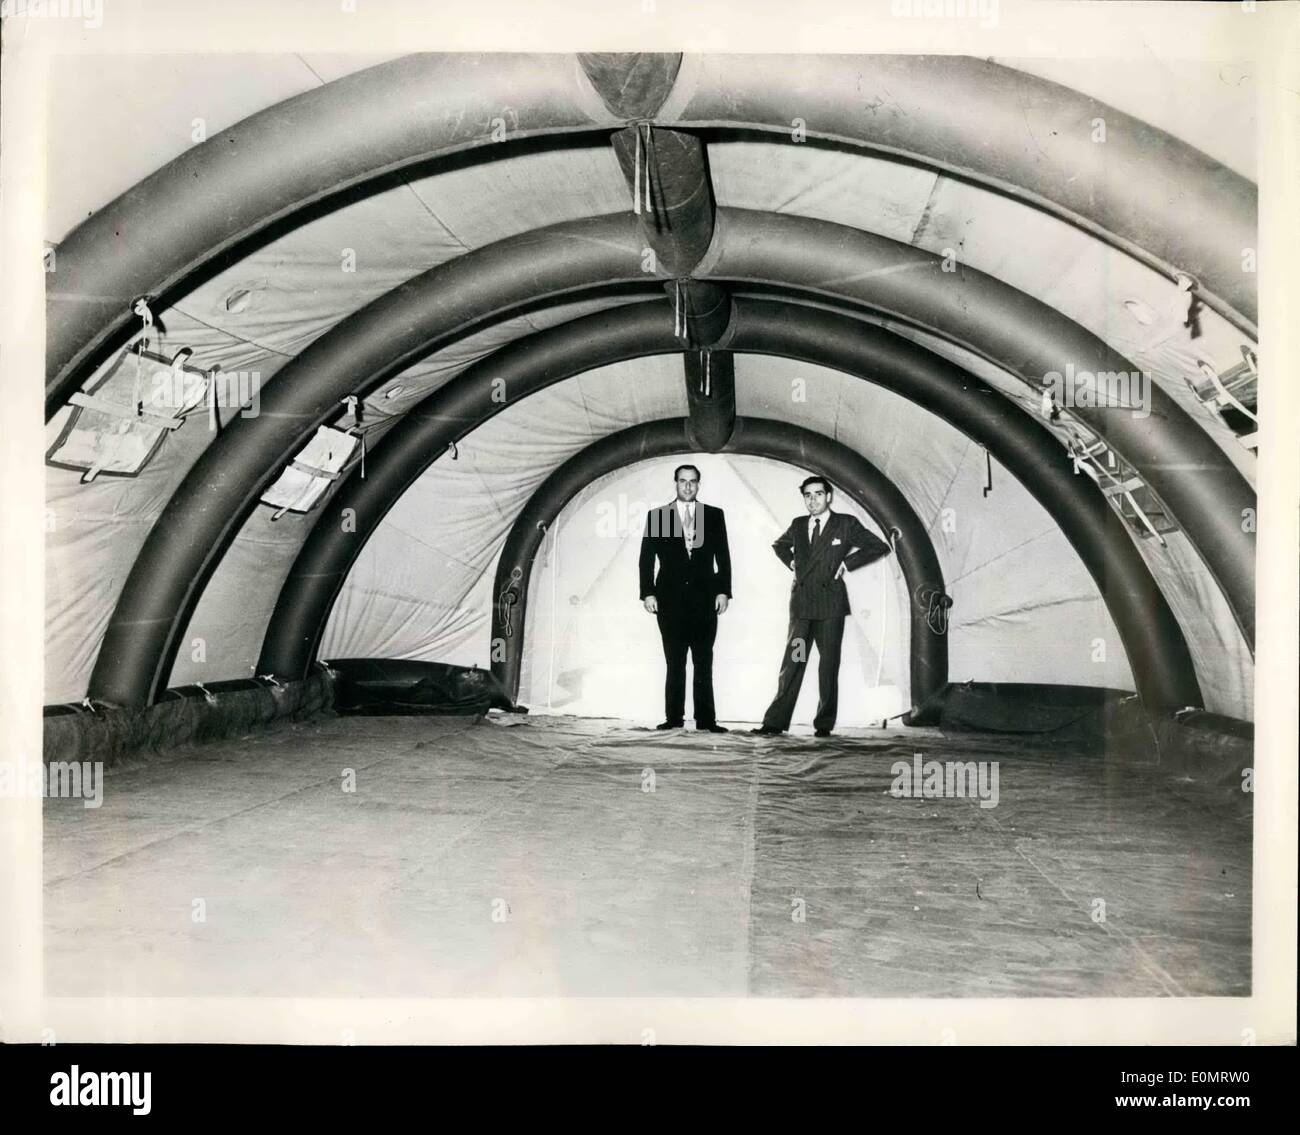 Jun. 06, 1956 - Huff and Puff and You'll Blow Your House Up: Designed by a British firm is an inflatable hut that can be put up Stock Photo